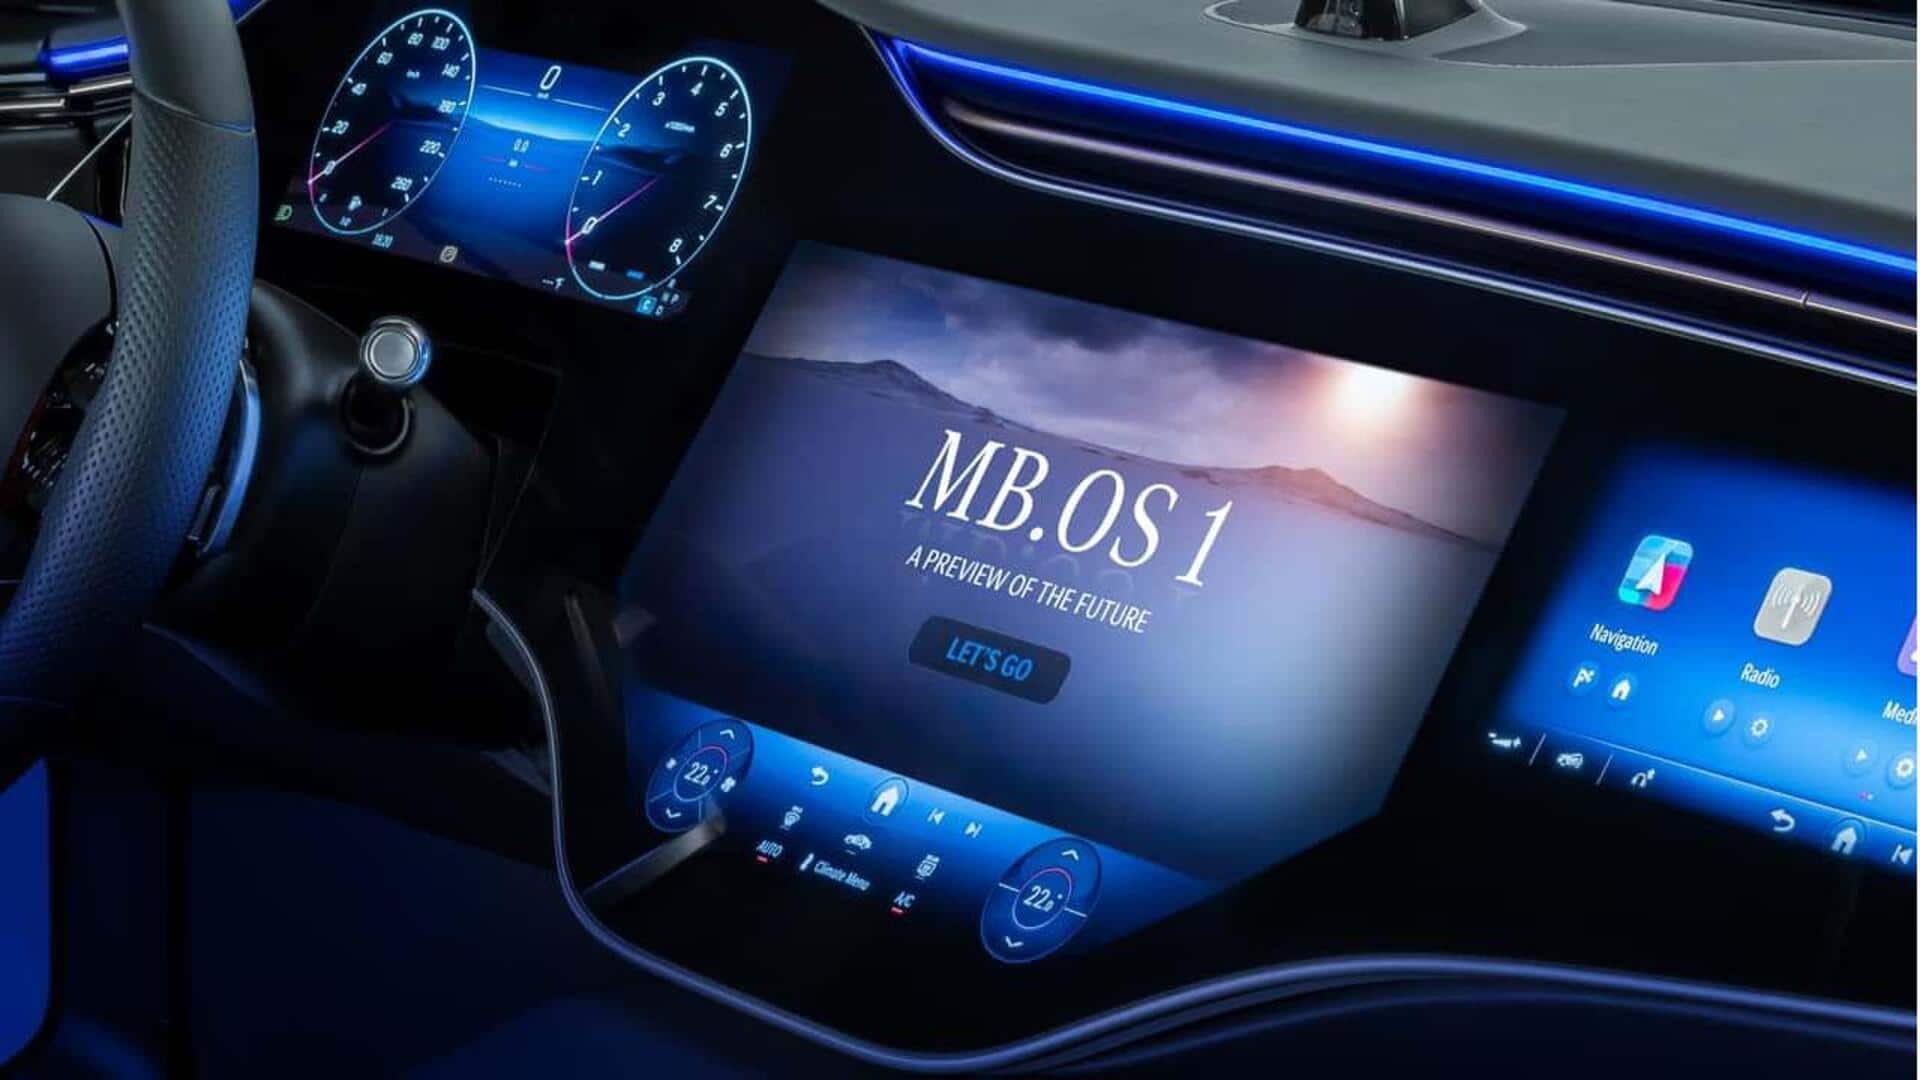 Mercedes-Benz unveils next-gen MB.OS with AI virtual assistant: What's special